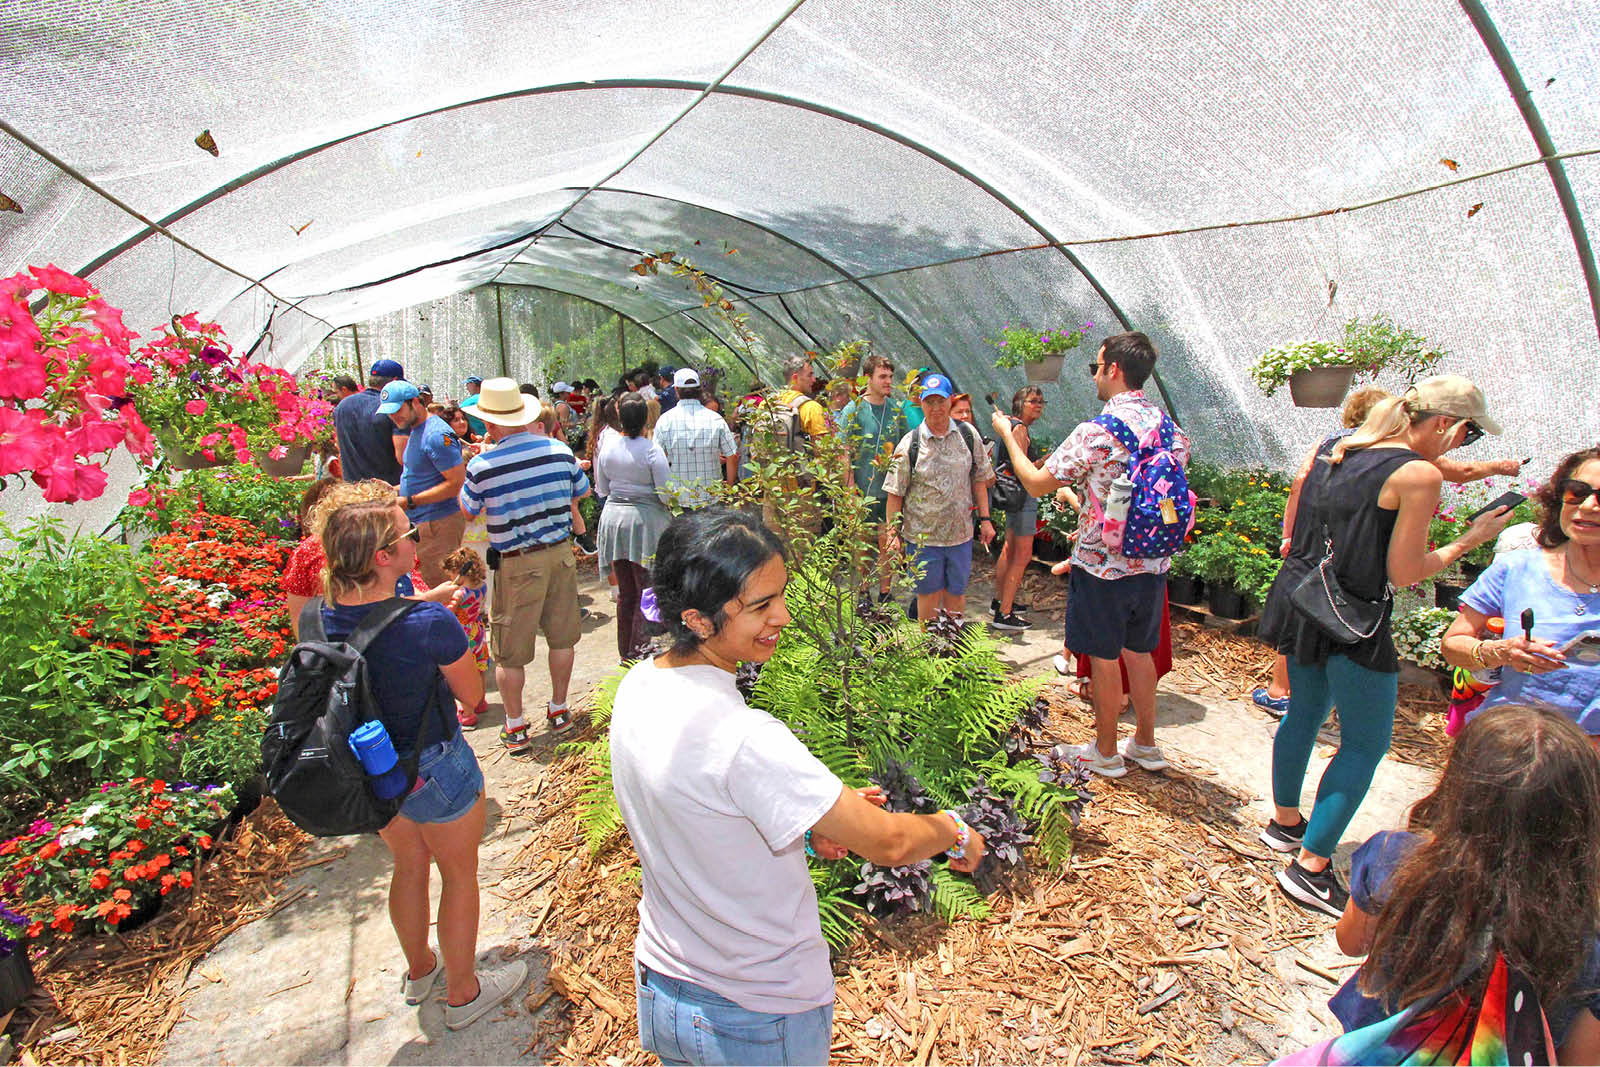 Guided experience through the exhibit with hundreds of native butterflies